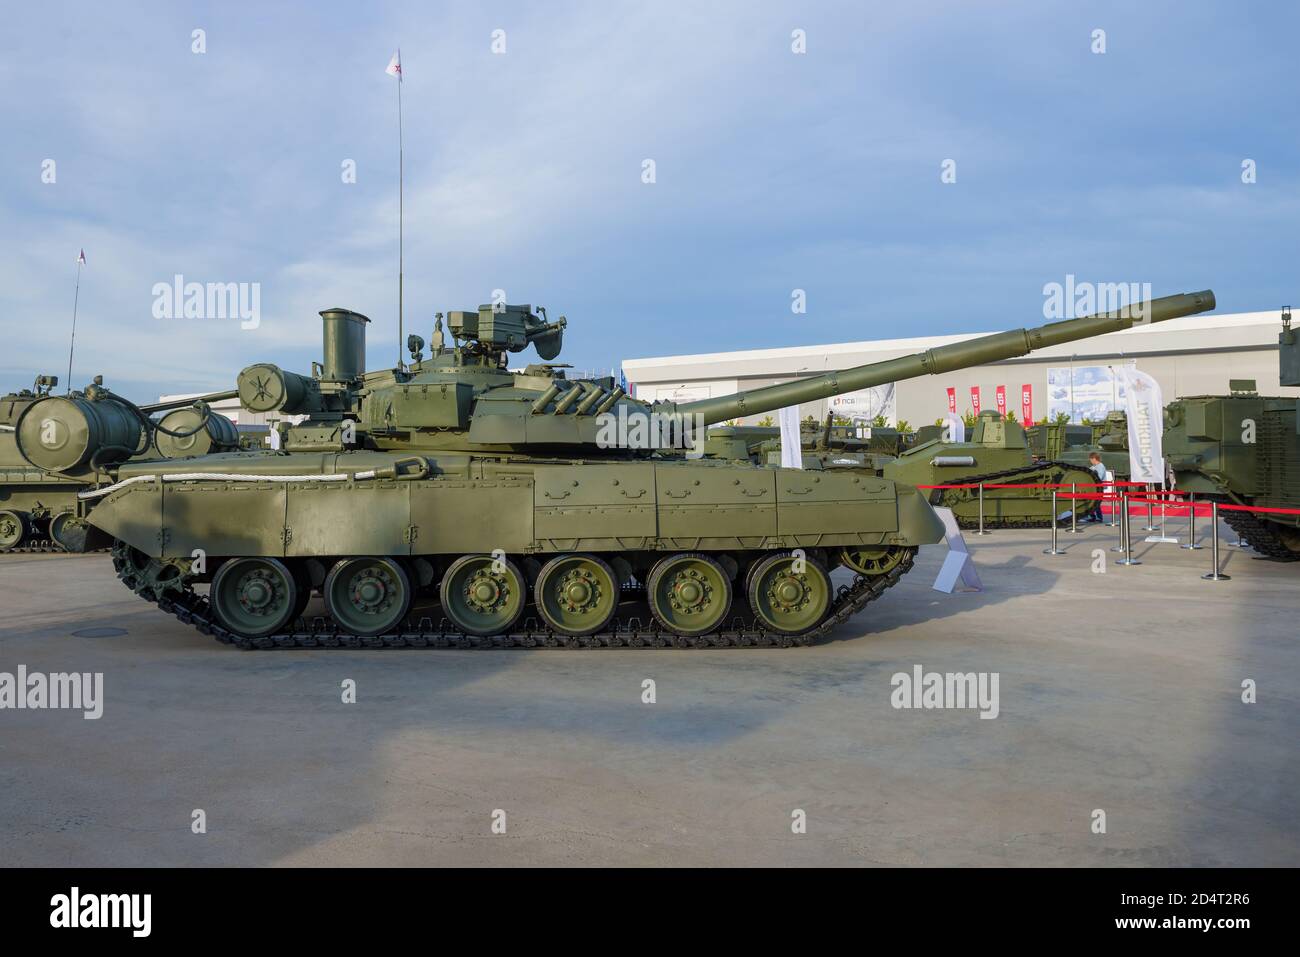 Tank o box lite hi-res stock photography and images - Alamy